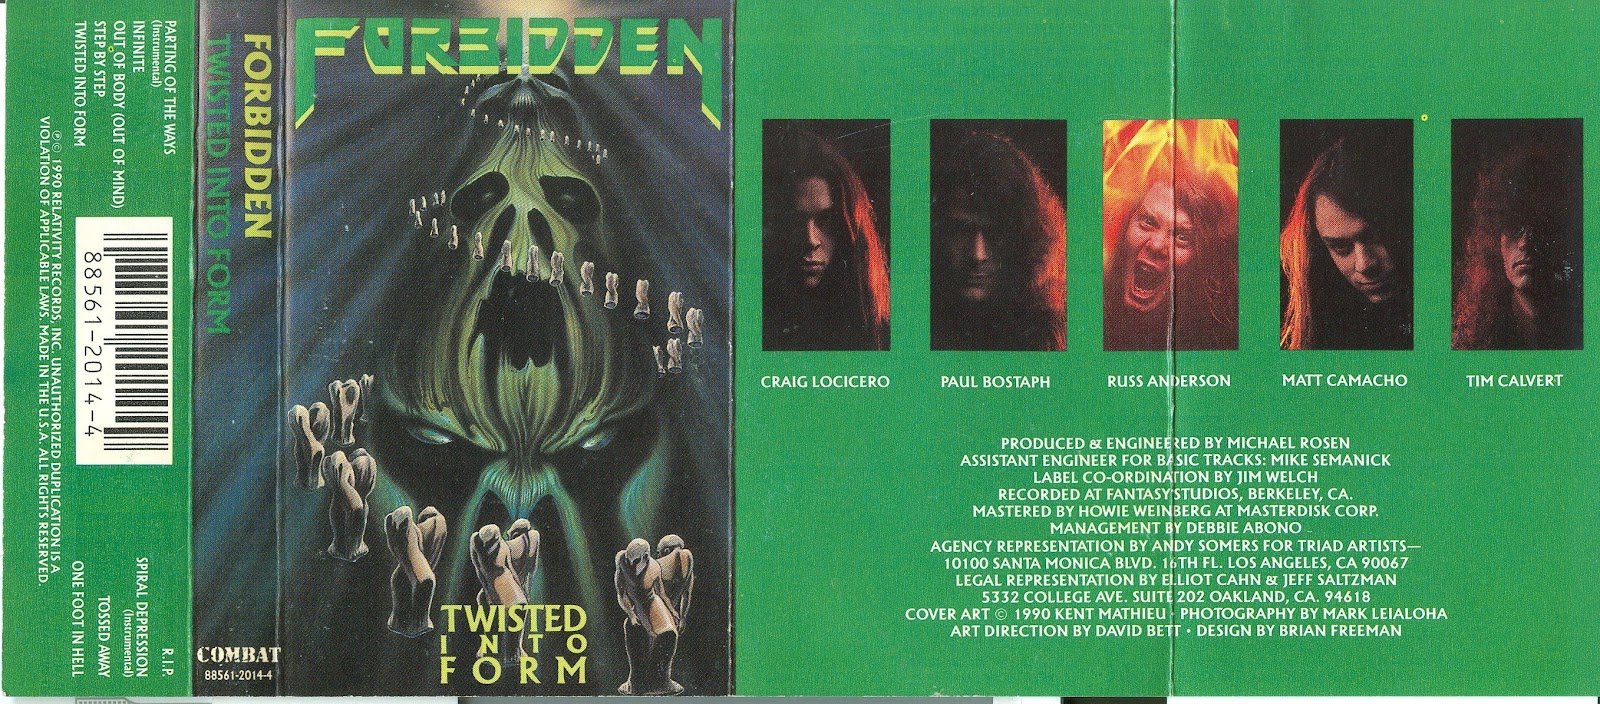 forbidden-twisted-into-form-vinyl-review-green-and-black-music